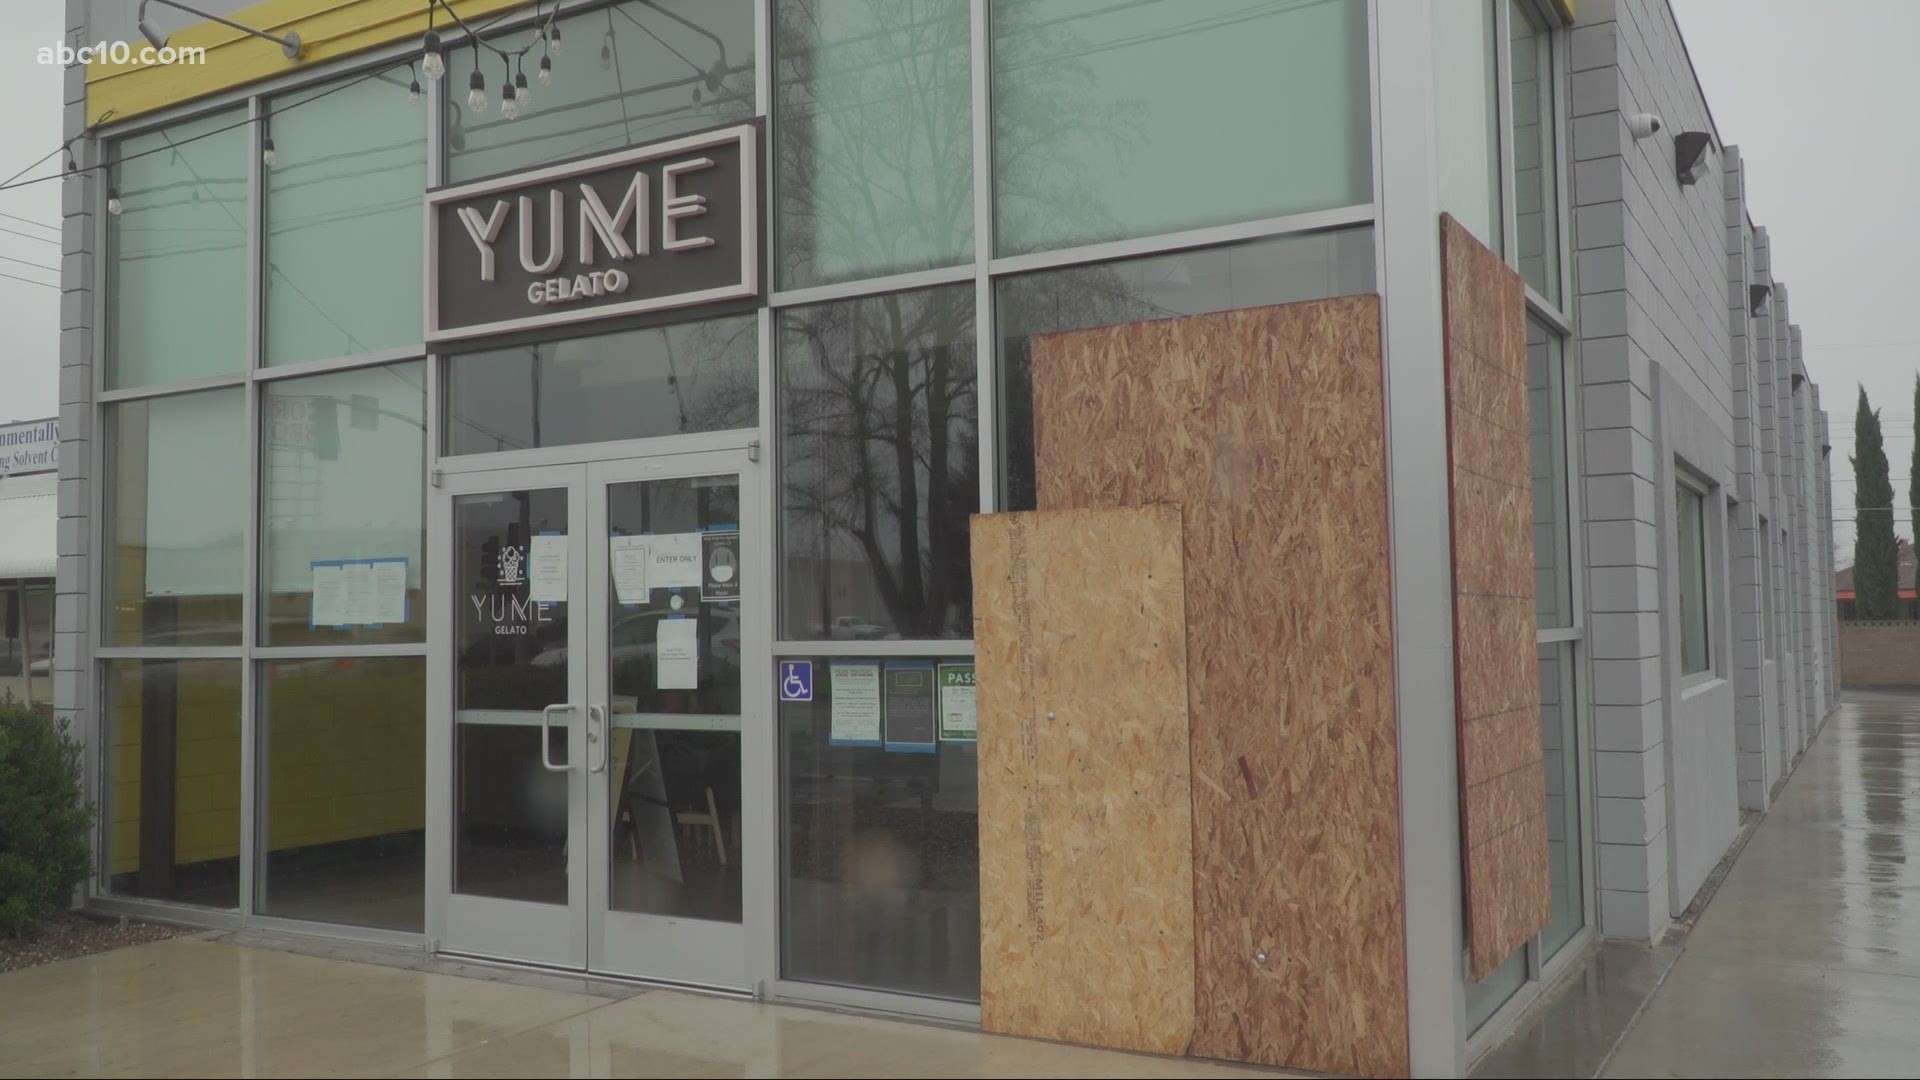 Police officials did not say if the crime was motivated by racism. Someone who works for Yume Gelato told ABC10 he can't confirm if the damages were a hate crime.